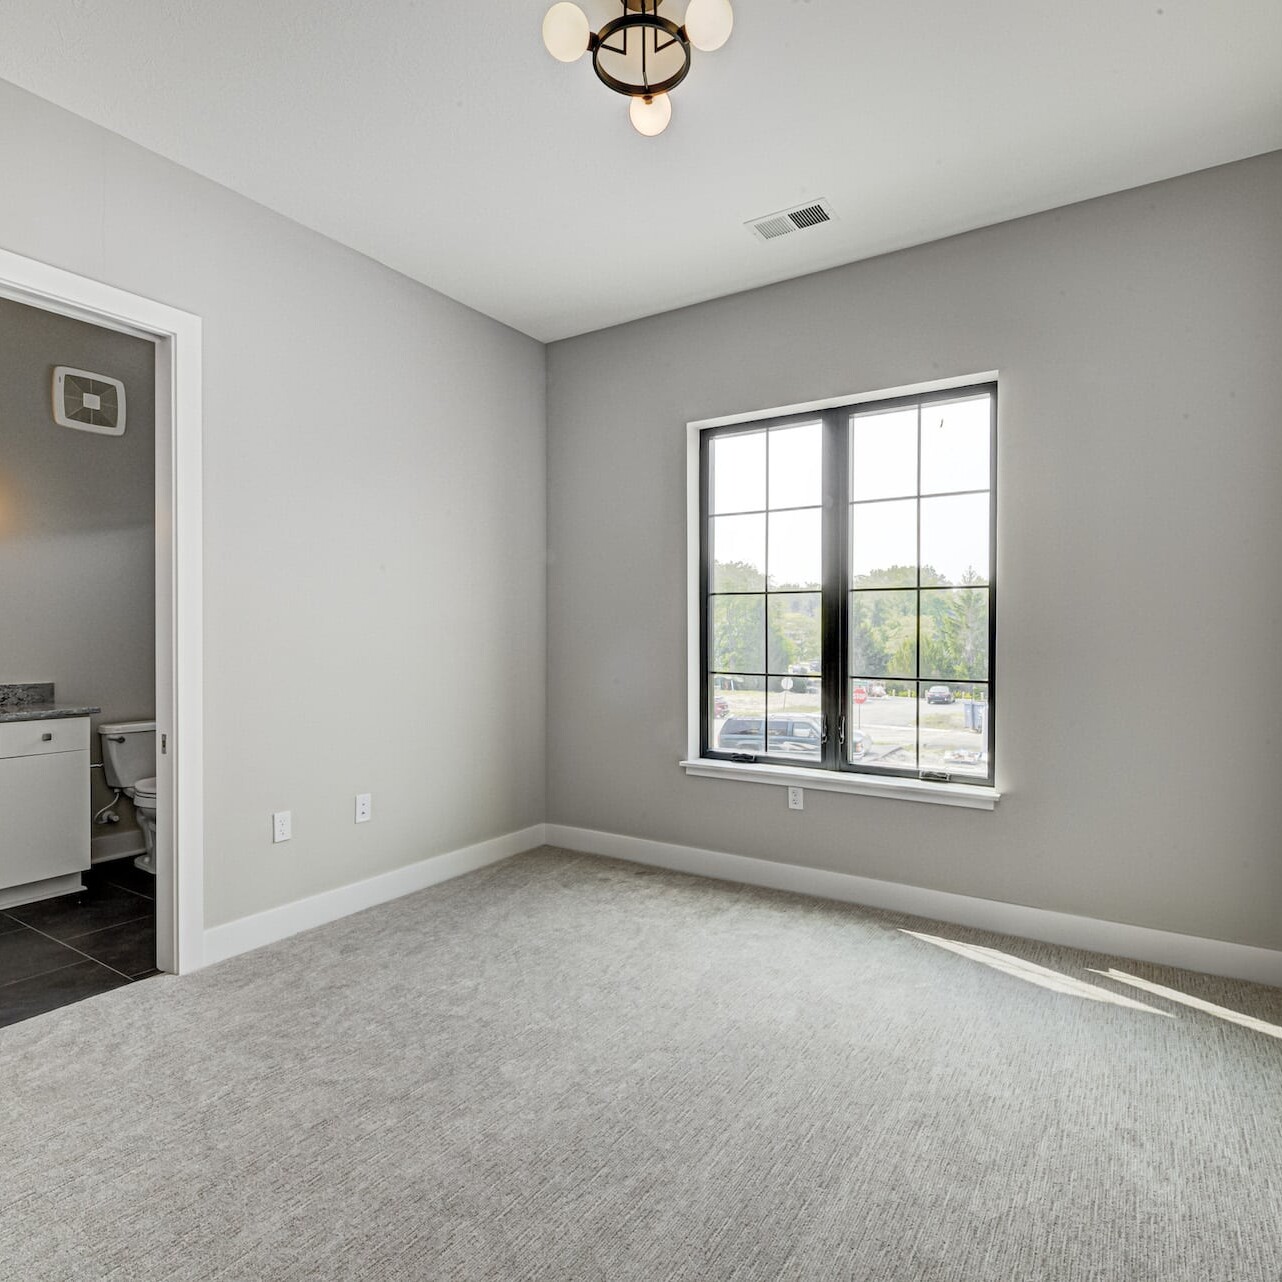 A gray bedroom with a window and a sink, perfect for those seeking custom homes or new homes in Carmel or Westfield, Indiana.